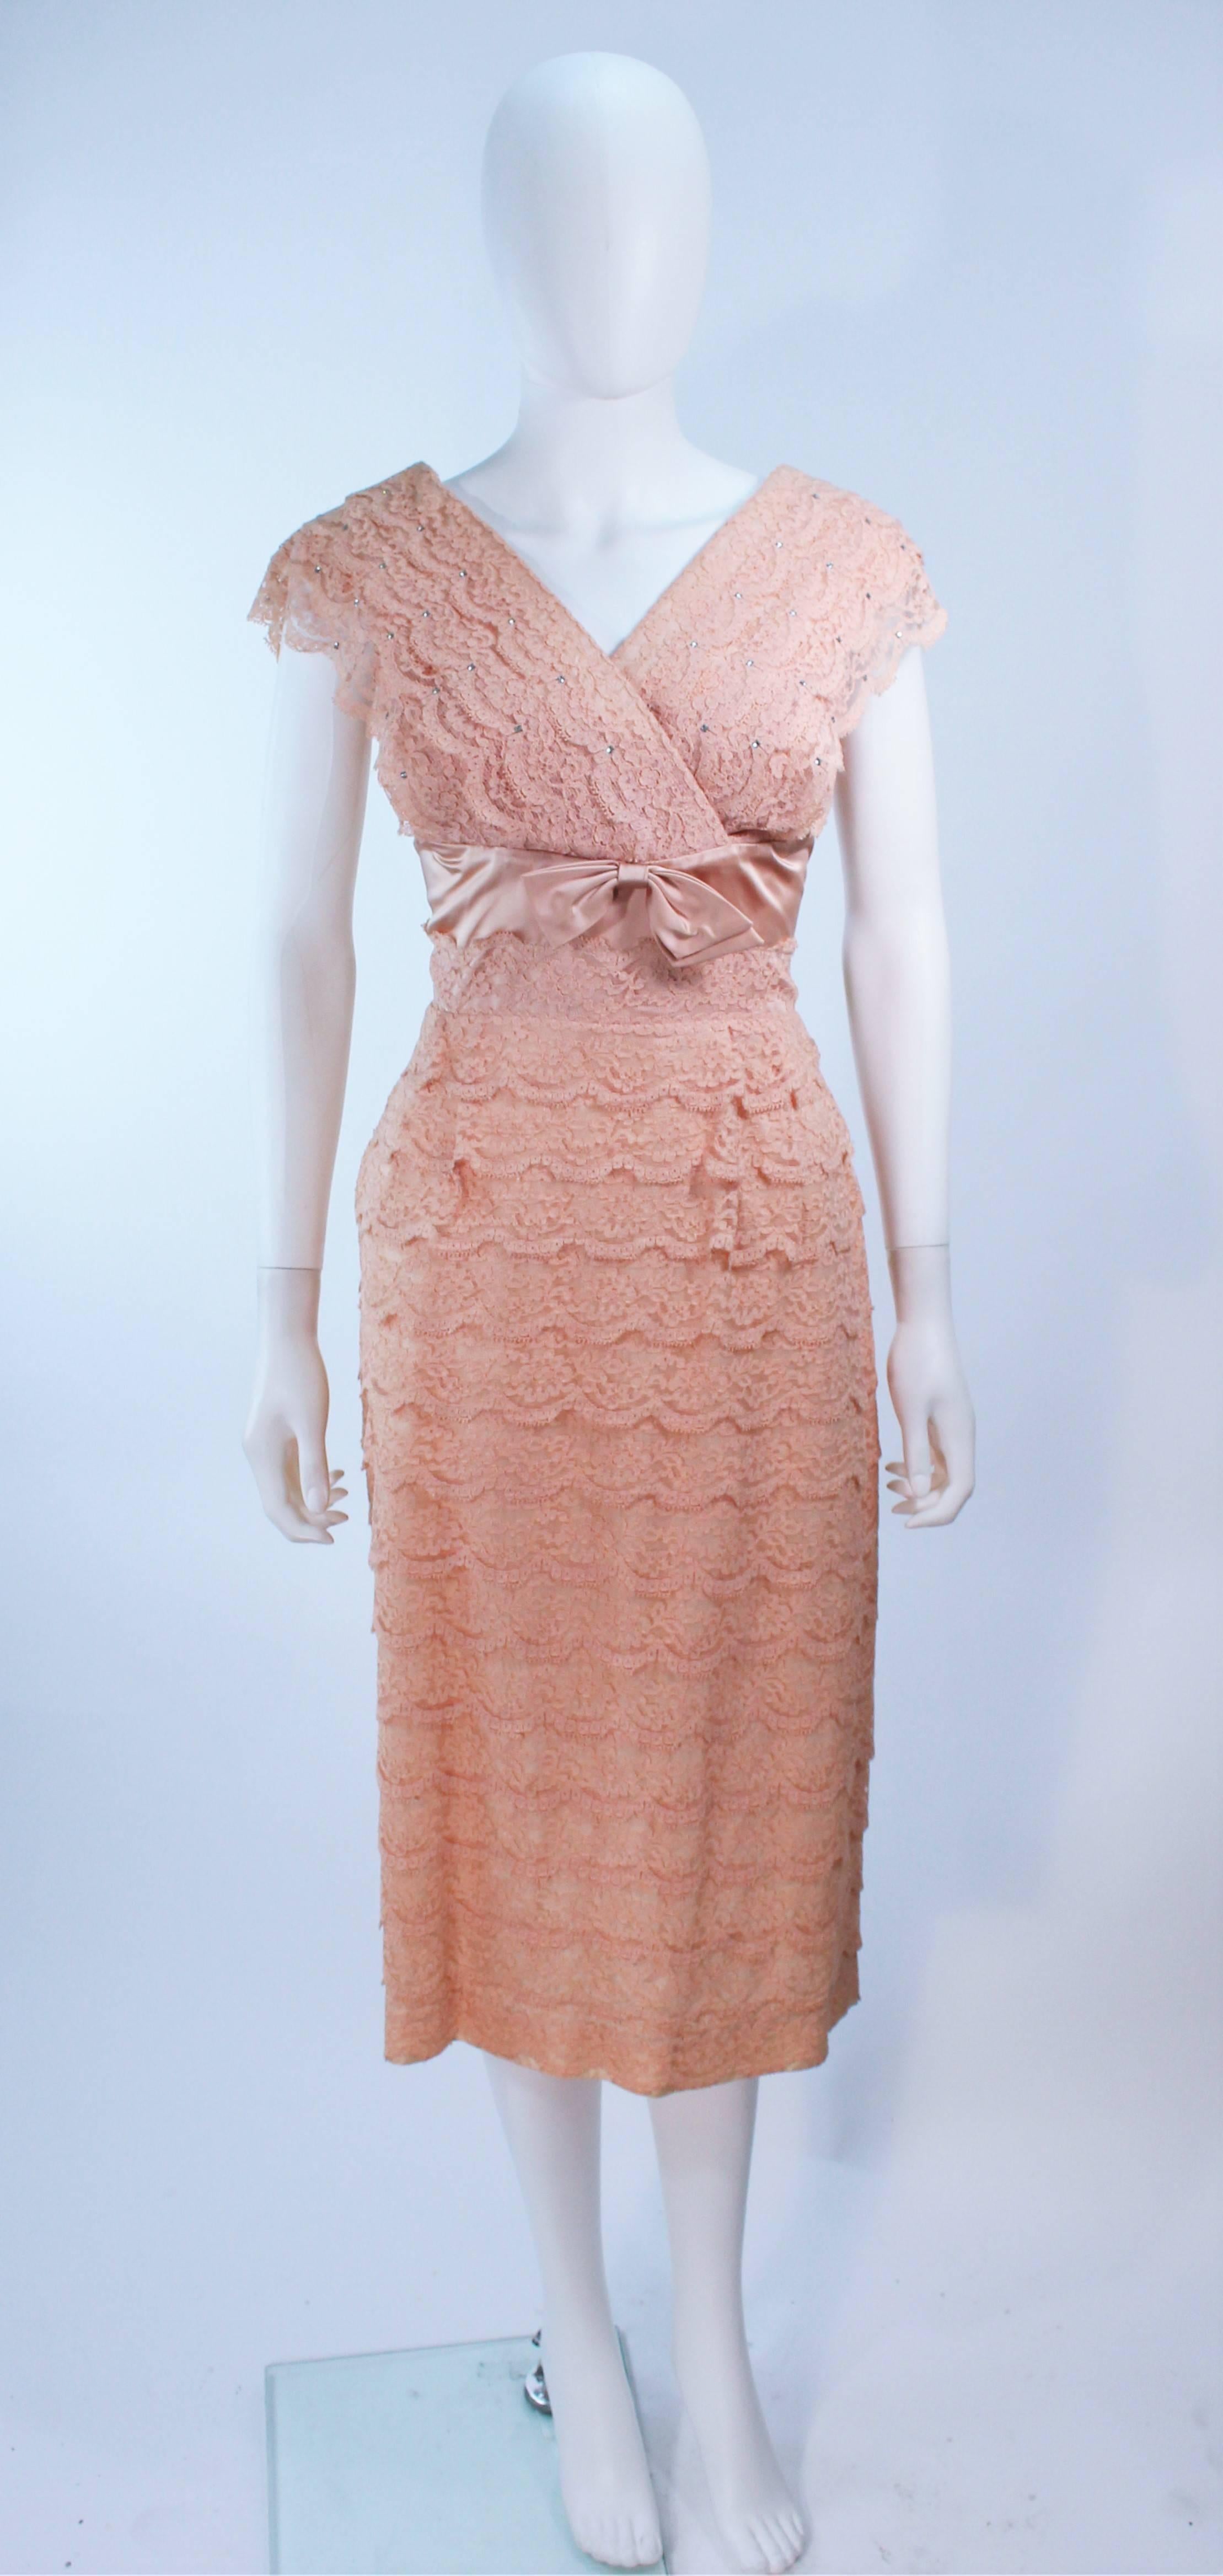  This cocktail dress is composed of a peach hue lace with tiered scalloped edges and rhinestone applique at the bust. Features a satin waist with bow. There is a center back zipper closure. In great vintage condition.

  **Please cross-reference